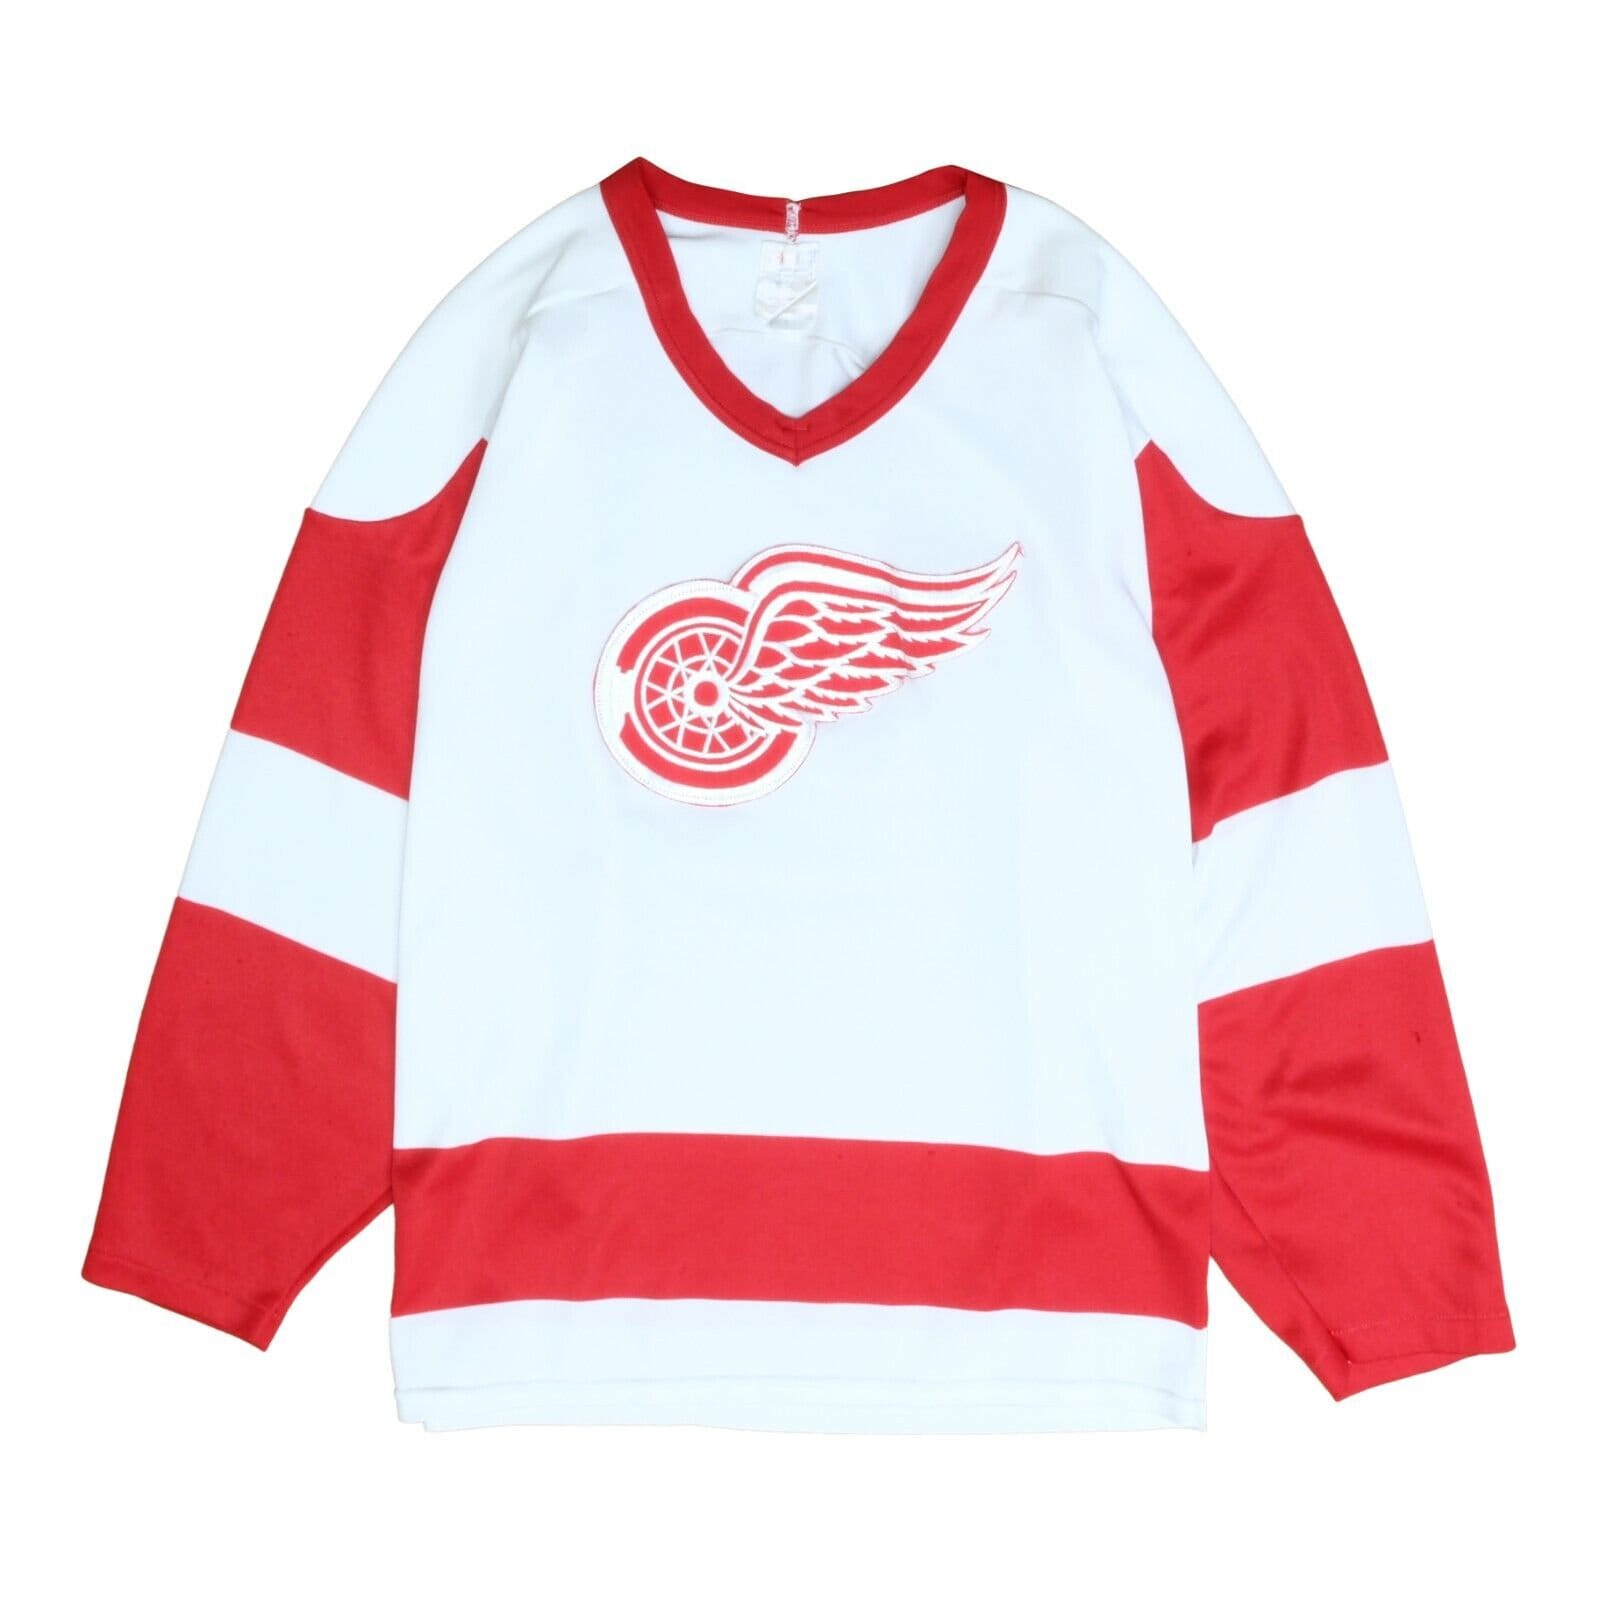 Replica Detroit Red Wings Centennial Classic Jersey, Size Large